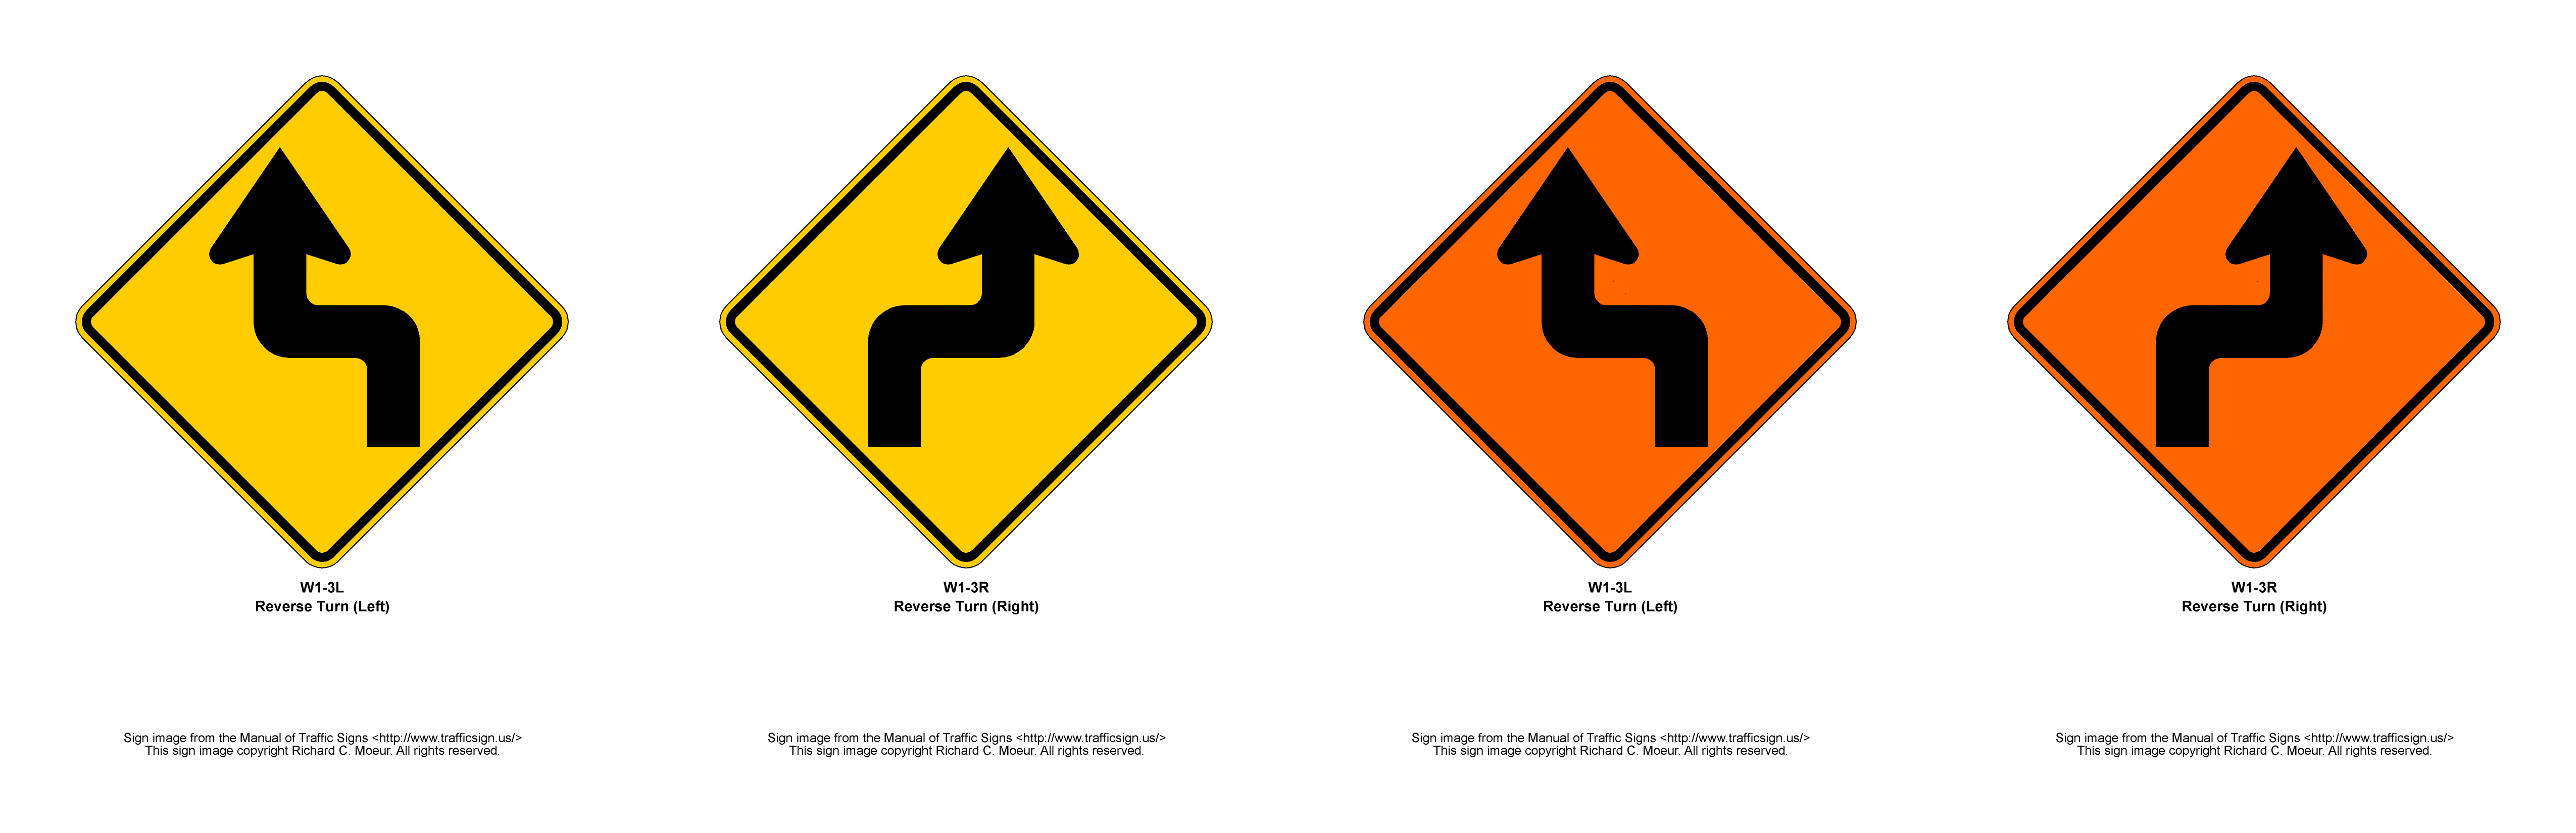 W1 Logo - Manual of Traffic Signs - W1 Series Signs